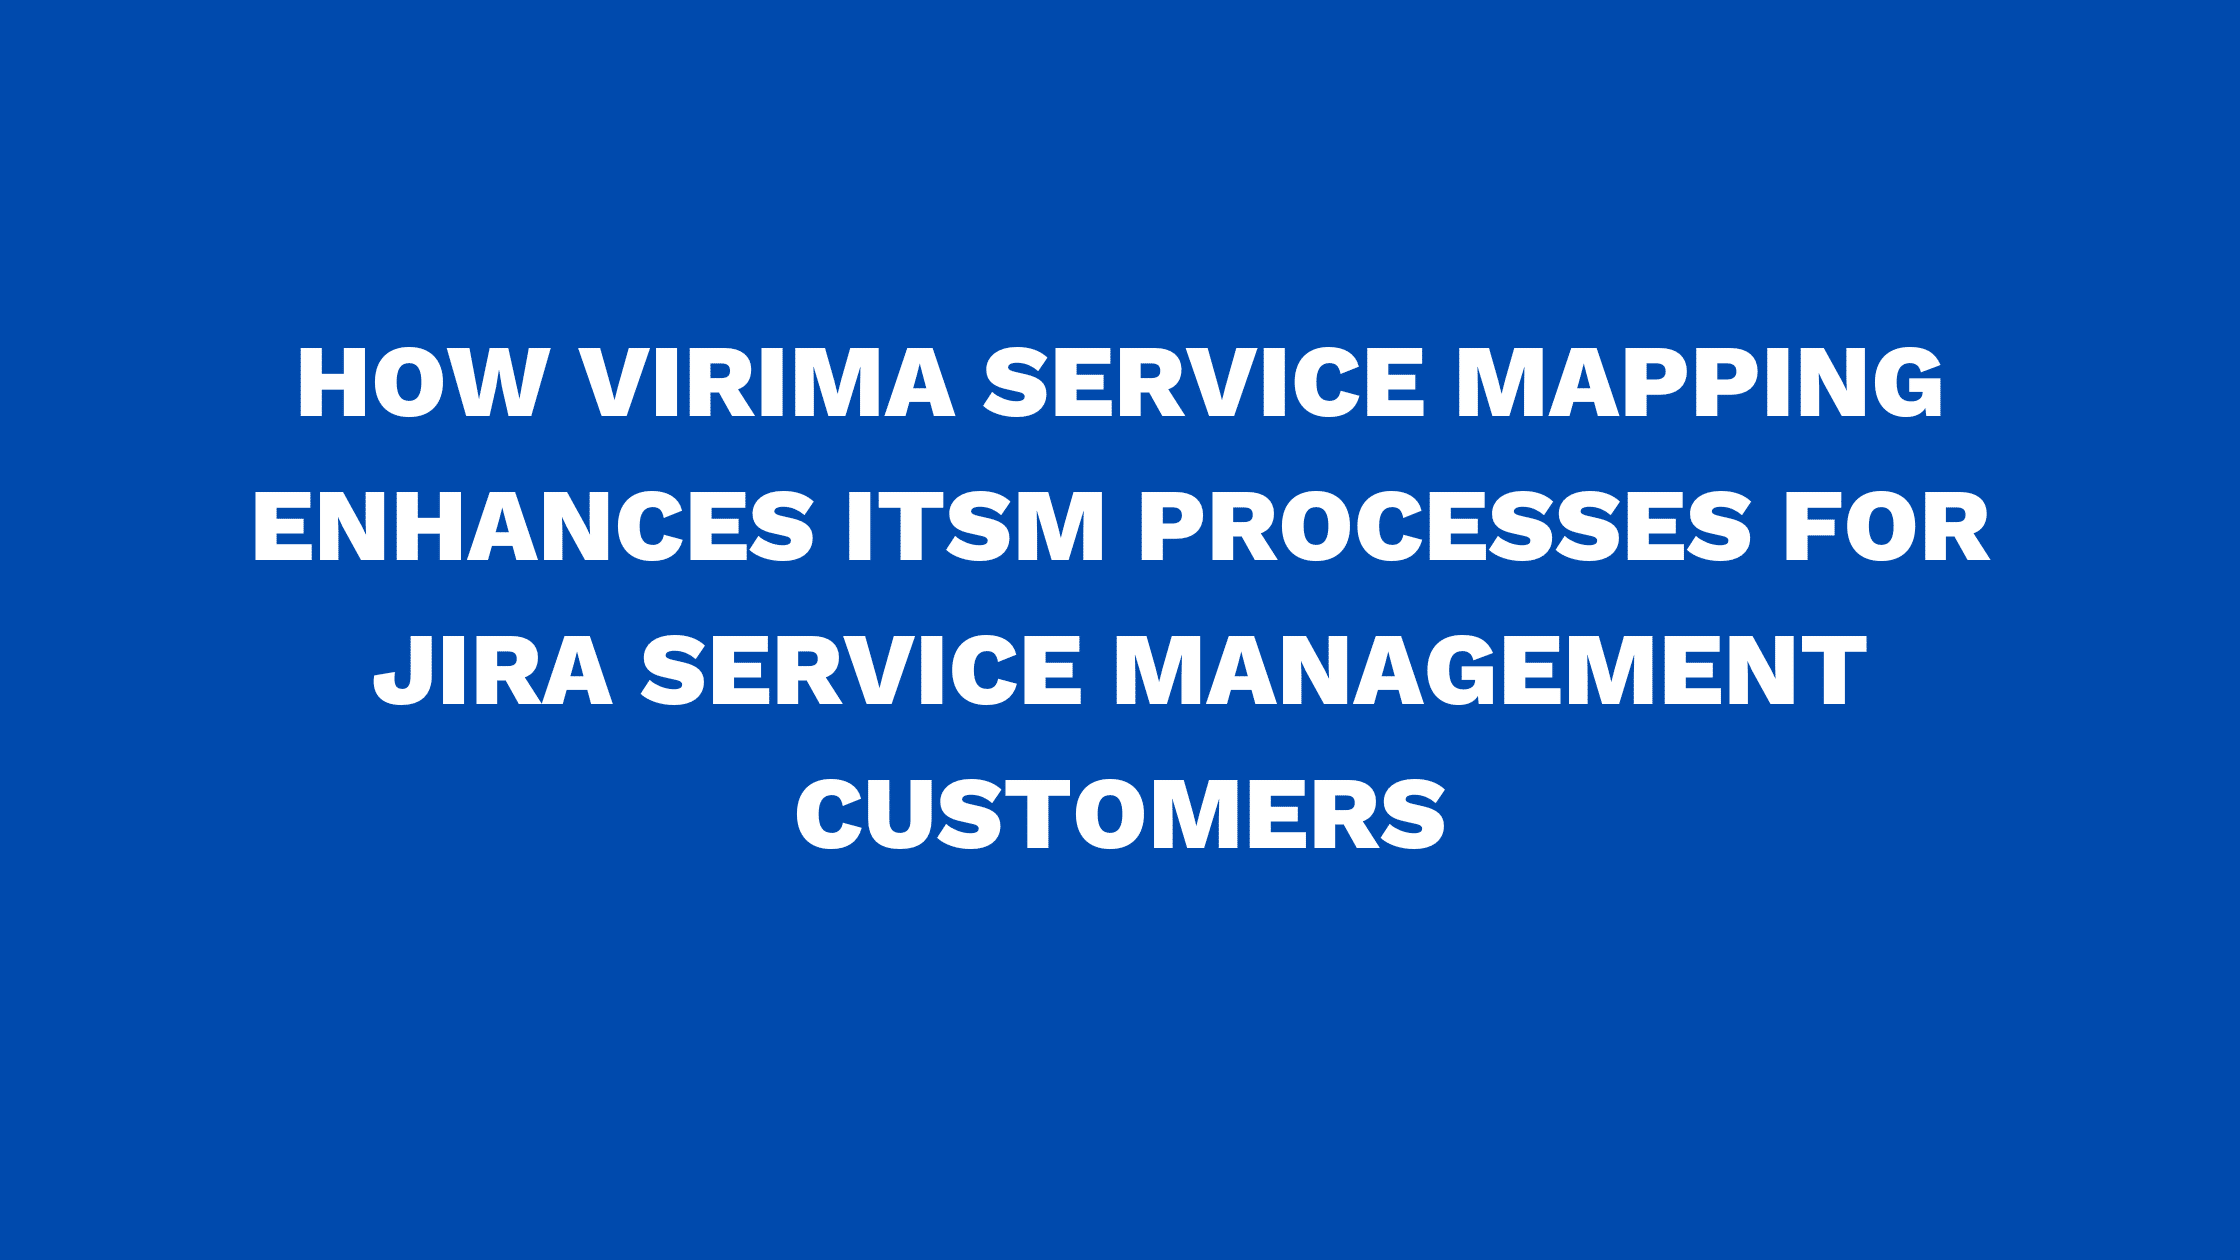 How Virima Service Mapping enhances ITSM processes for Jira Service Management customers